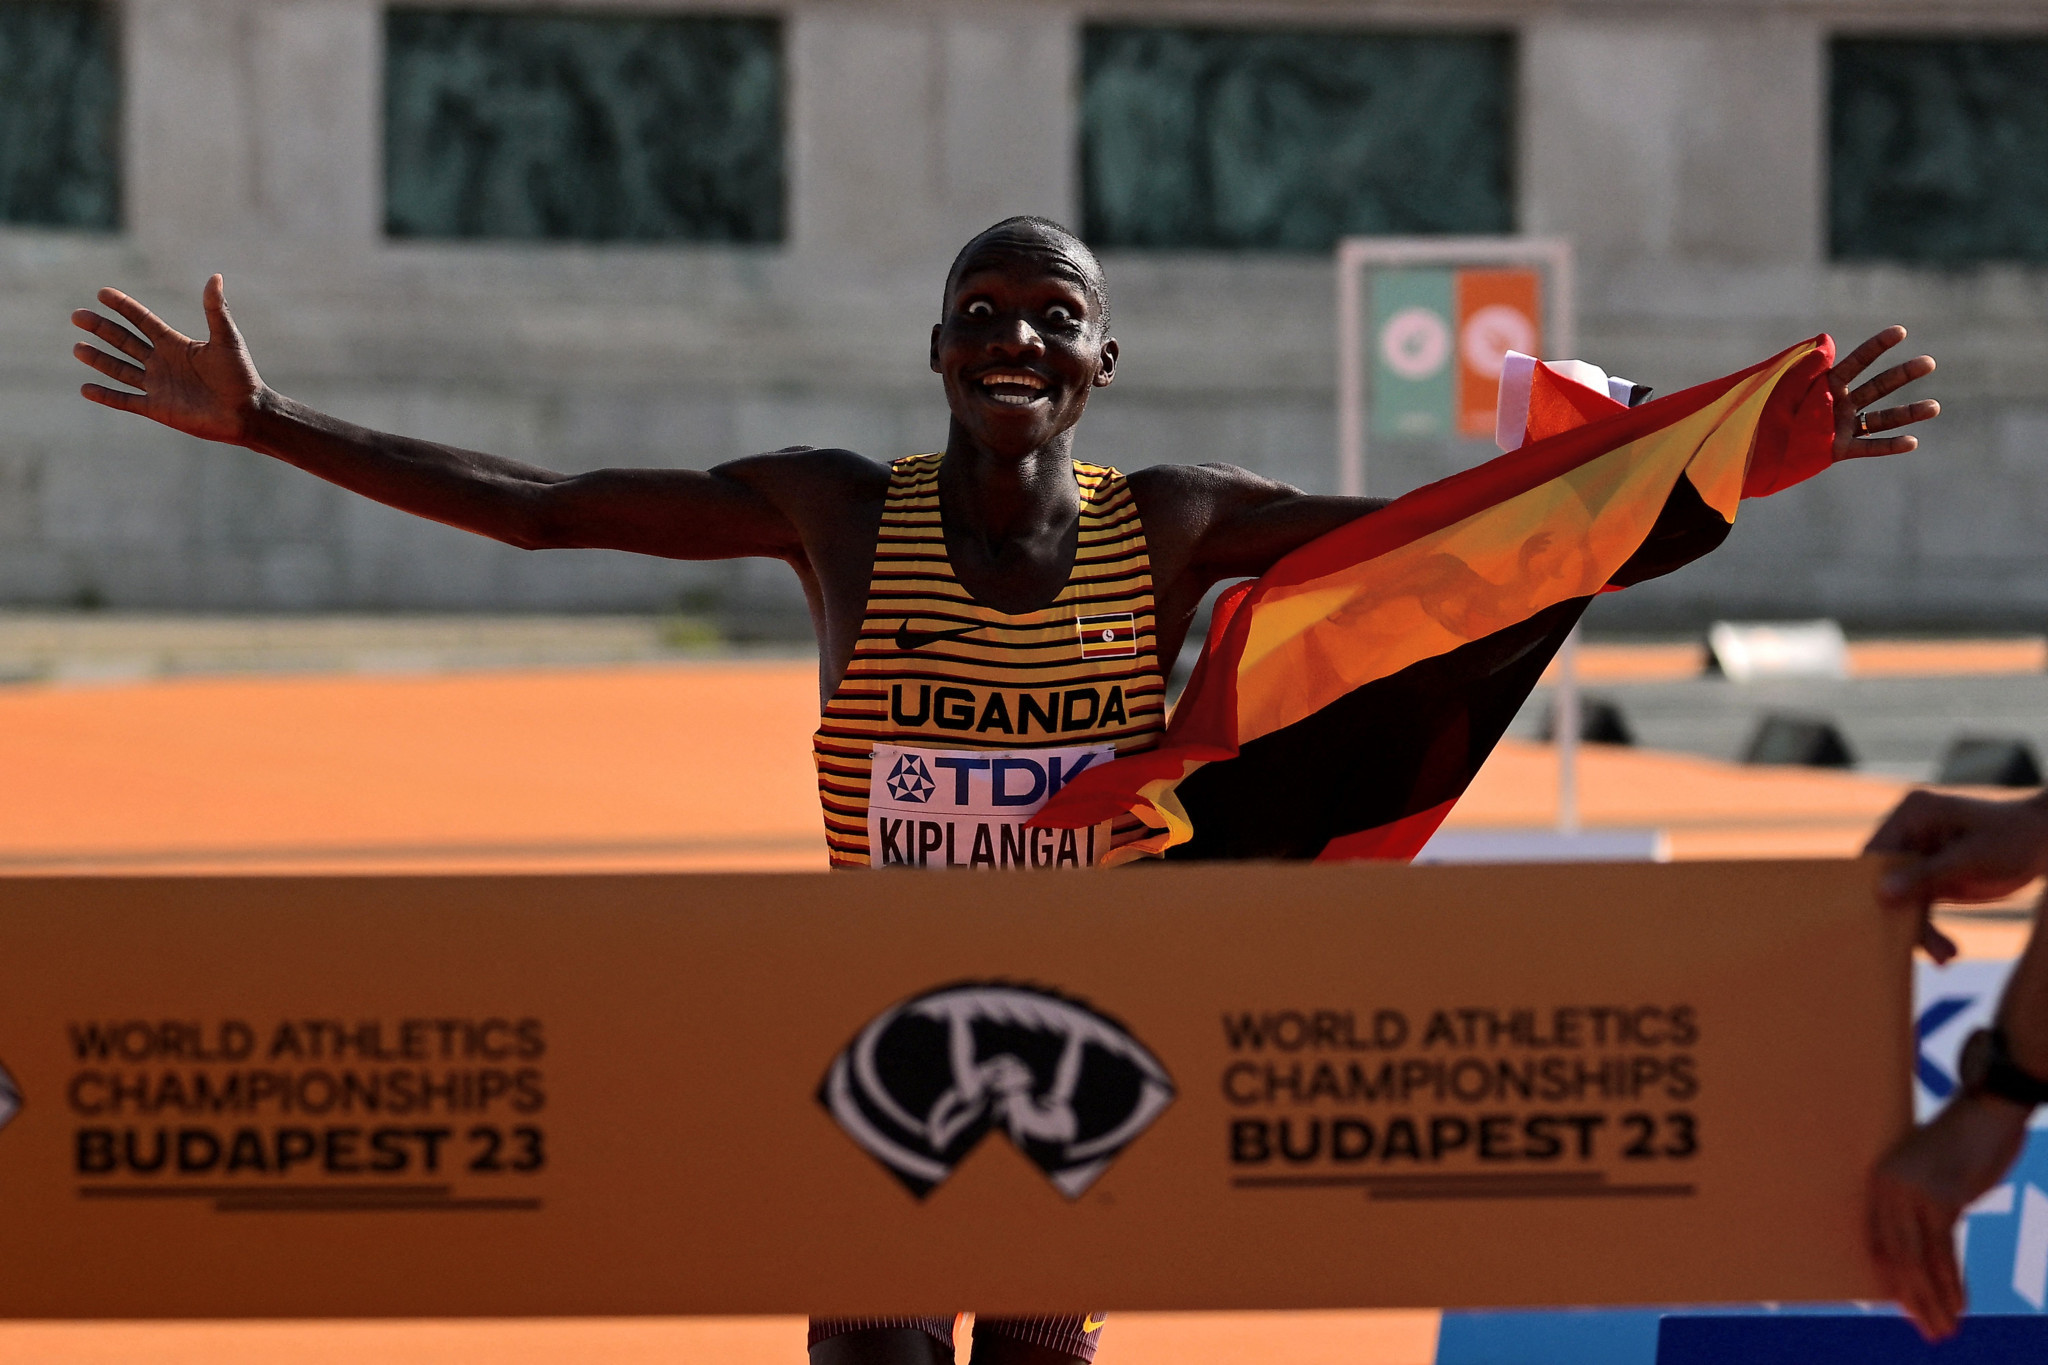 The final day in Budapest had begun with Uganda's Victor Kiplangat winning the men's marathon at Heroes' Square ©Getty Images